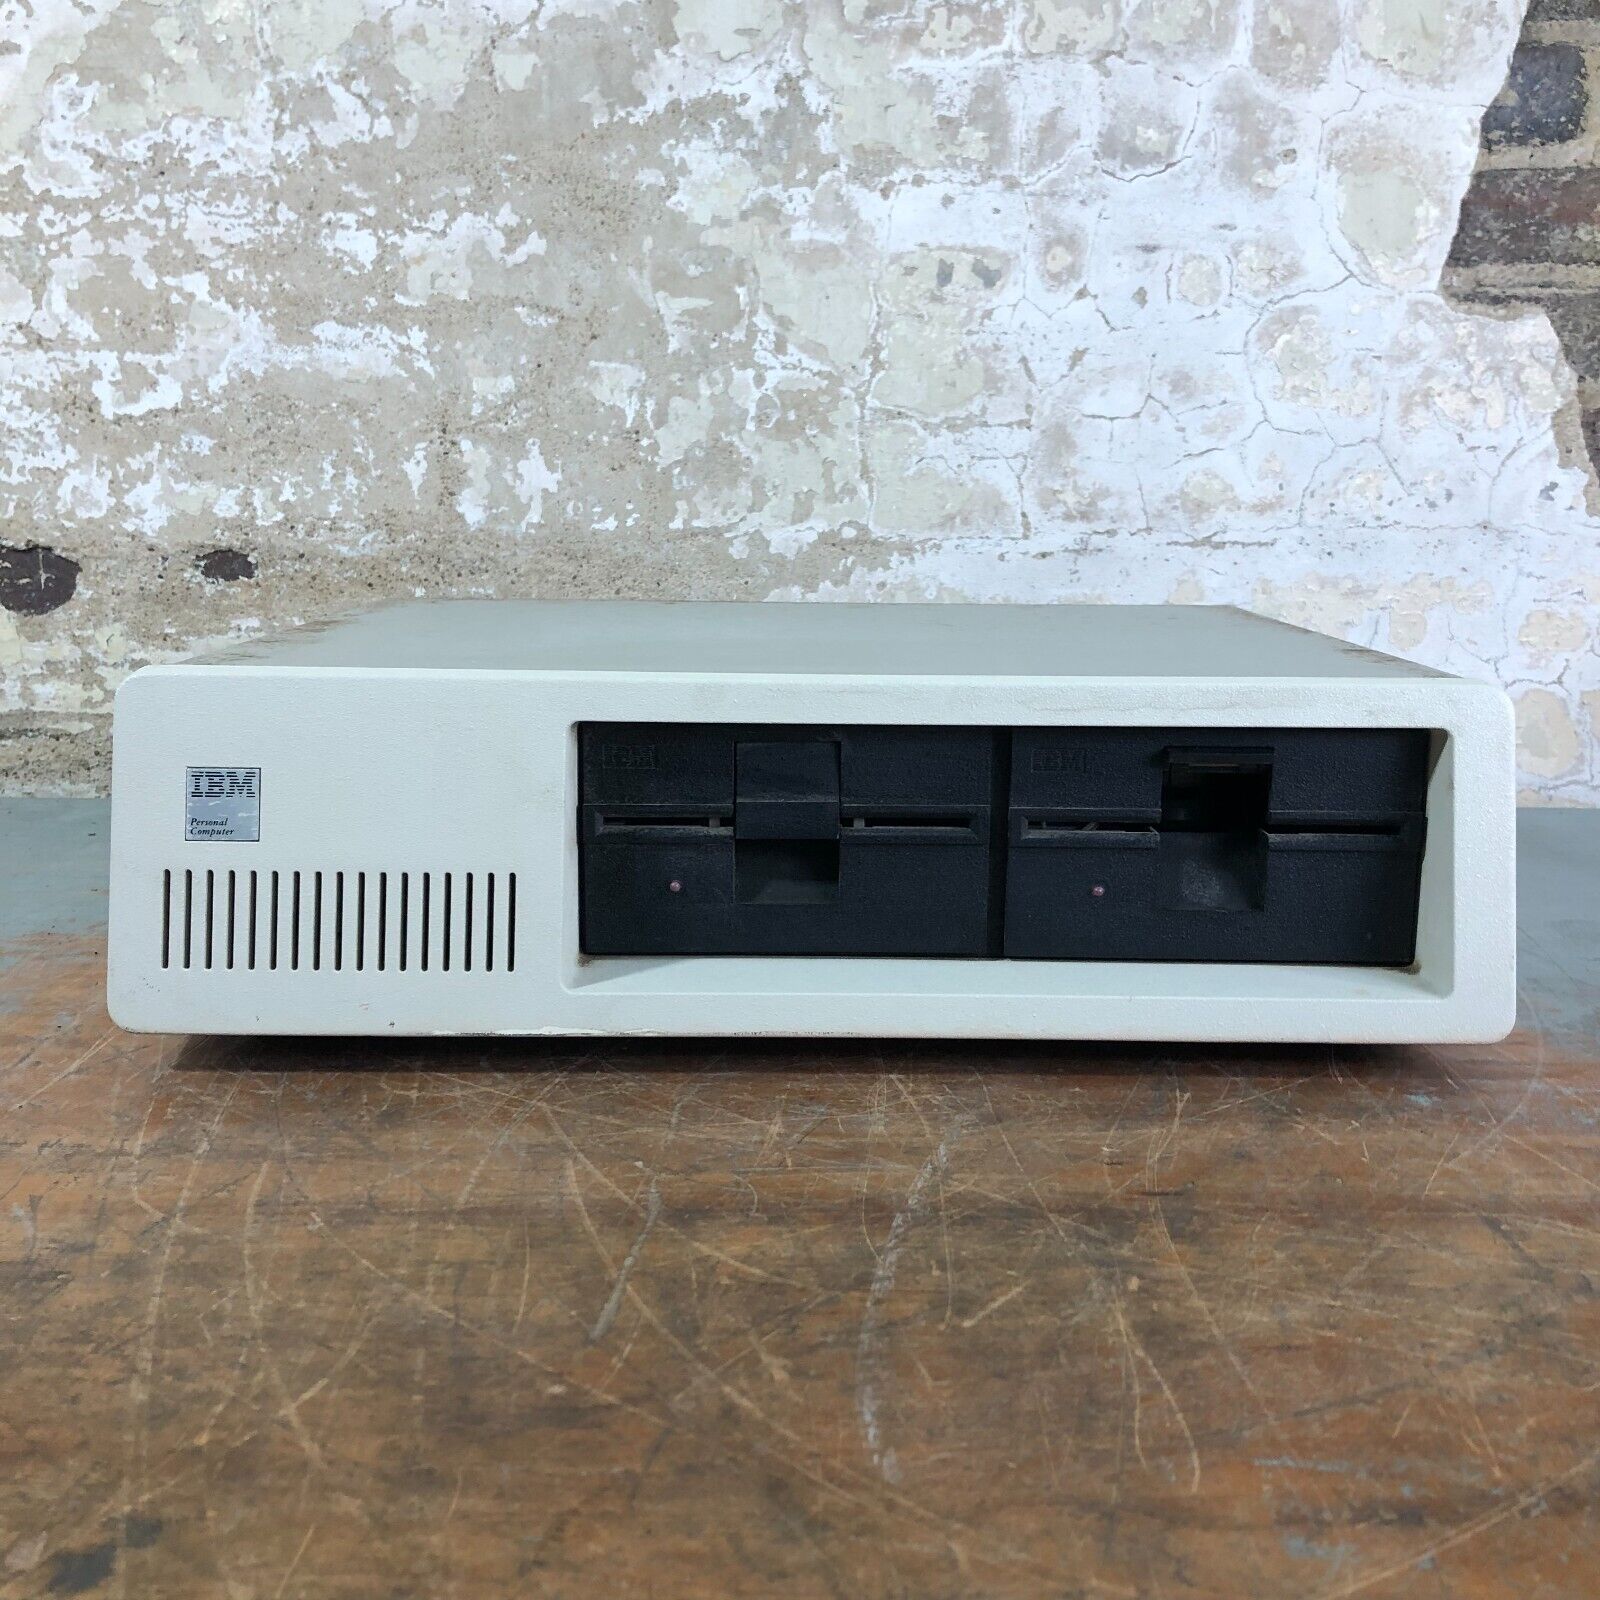 Vintage IBM PC XT 5150 Personal Computer - Complete Ready for Restoration